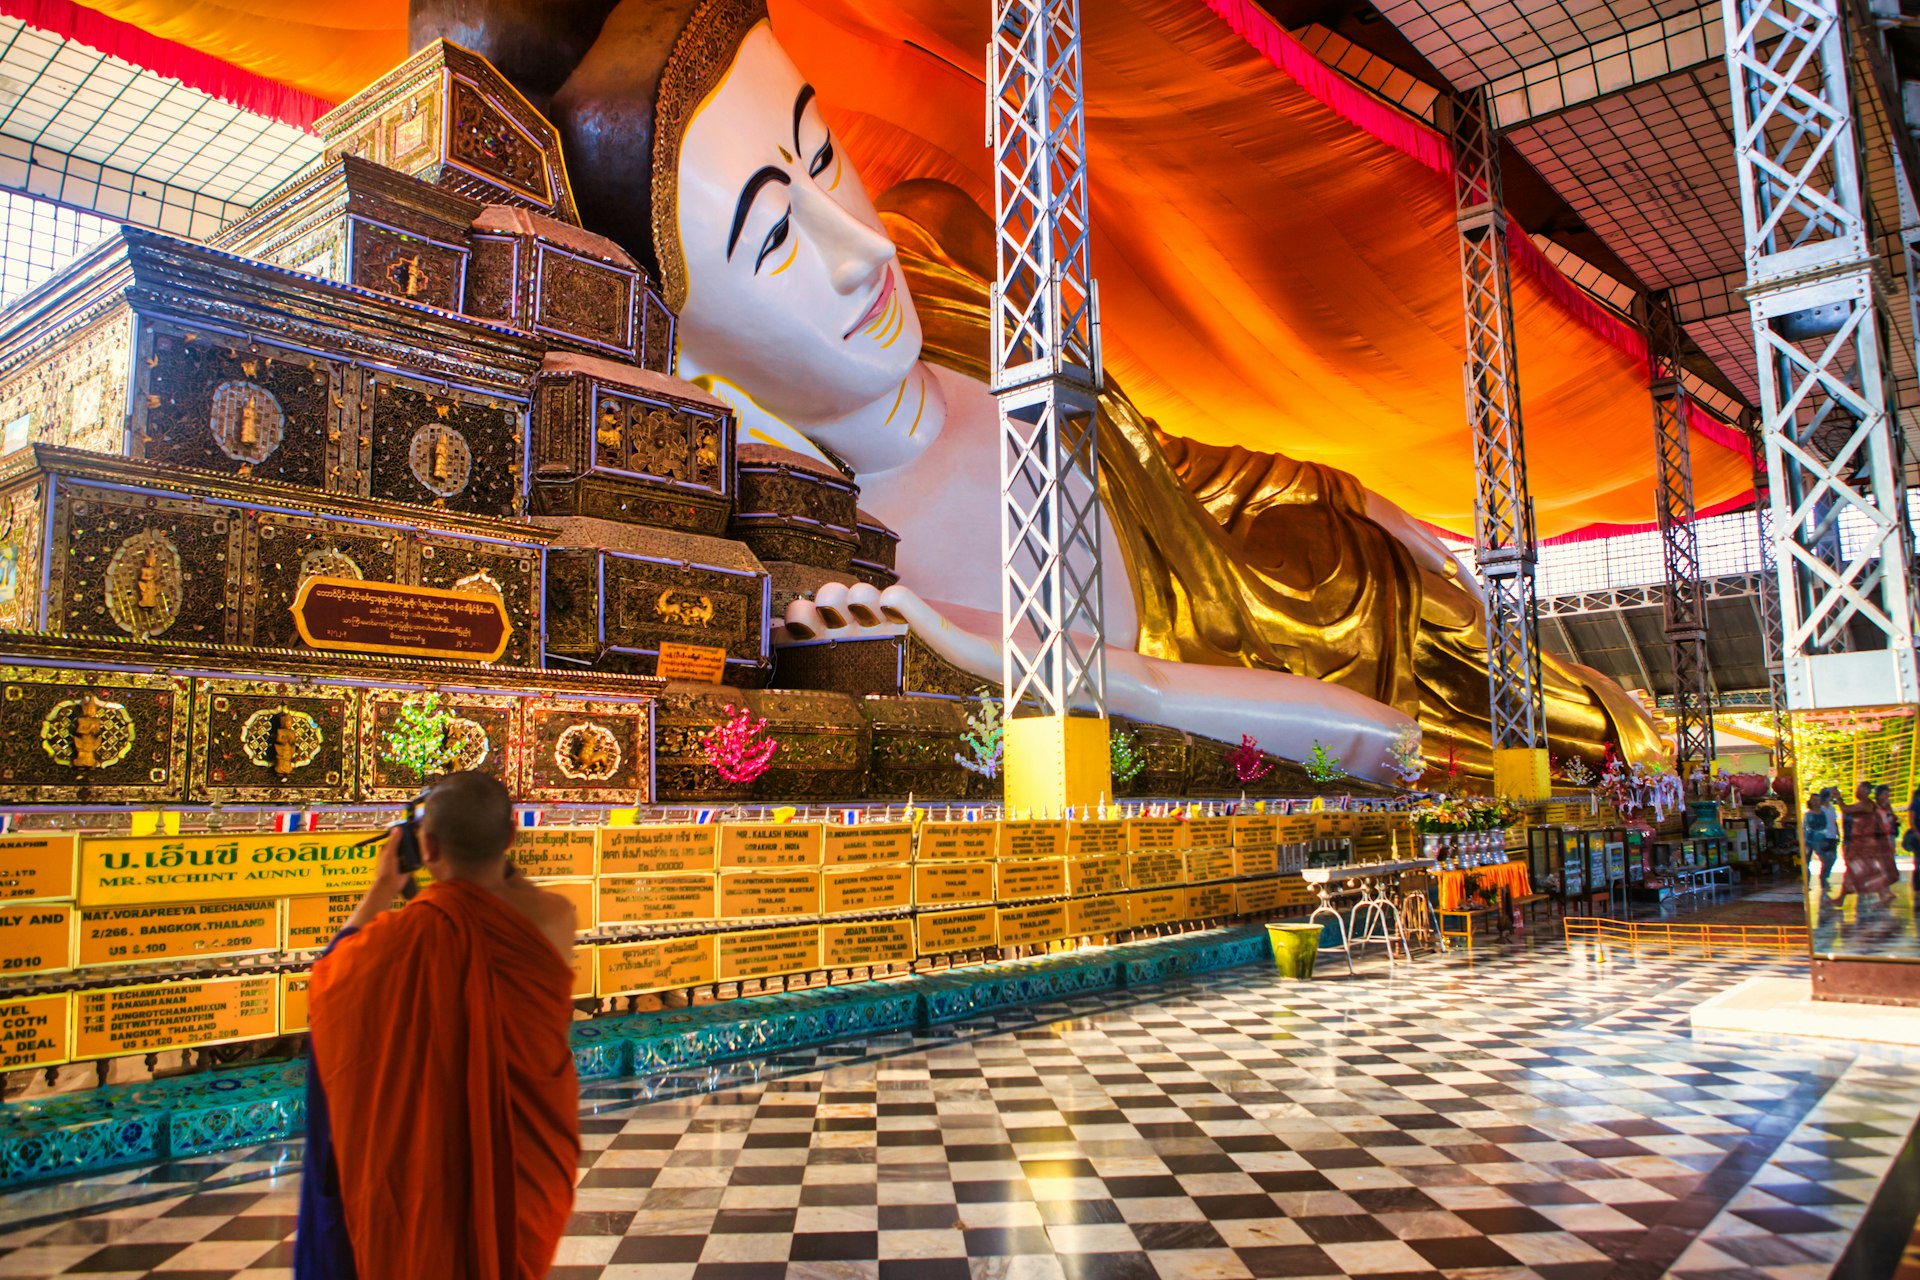 A monk wearing orange robes takes a photograph of a huge reclining Buddha